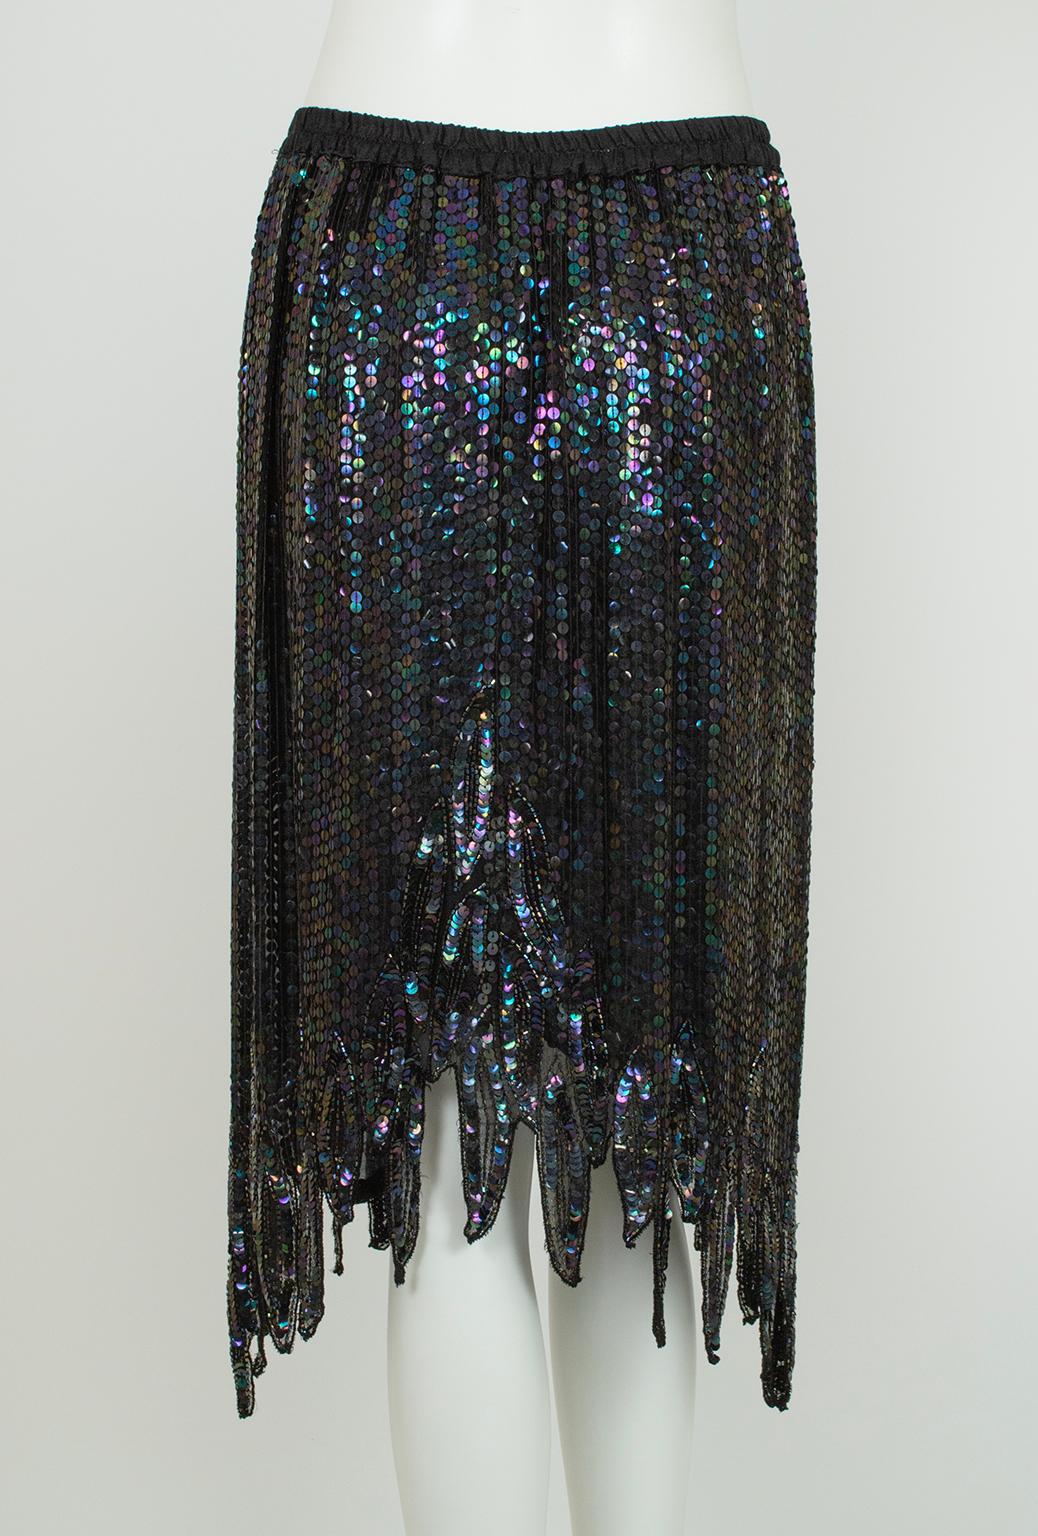 Black Sequin Zig Zag Edge Top, Skirt and Jogger Co-ord Set – M-L, 1980s For Sale 12